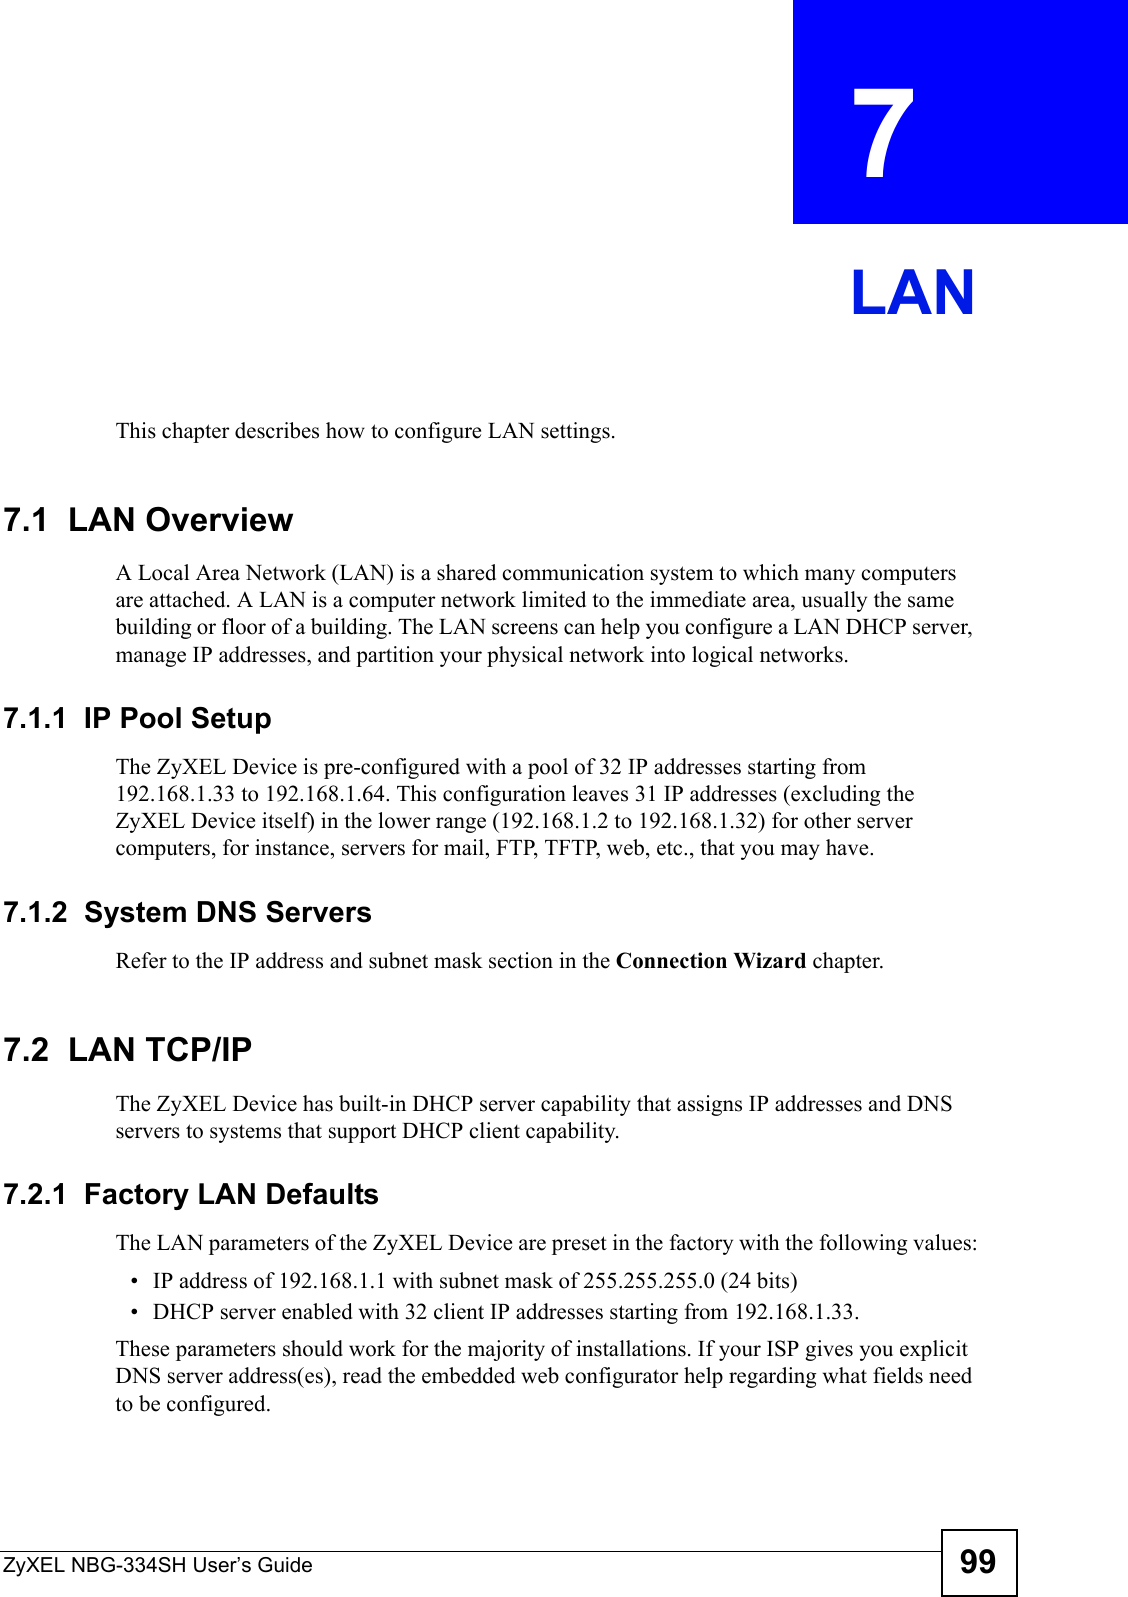 ZyXEL NBG-334SH User’s Guide 99CHAPTER  7 LANThis chapter describes how to configure LAN settings.7.1  LAN OverviewA Local Area Network (LAN) is a shared communication system to which many computers are attached. A LAN is a computer network limited to the immediate area, usually the same building or floor of a building. The LAN screens can help you configure a LAN DHCP server, manage IP addresses, and partition your physical network into logical networks.7.1.1  IP Pool SetupThe ZyXEL Device is pre-configured with a pool of 32 IP addresses starting from 192.168.1.33 to 192.168.1.64. This configuration leaves 31 IP addresses (excluding the ZyXEL Device itself) in the lower range (192.168.1.2 to 192.168.1.32) for other server computers, for instance, servers for mail, FTP, TFTP, web, etc., that you may have.7.1.2  System DNS ServersRefer to the IP address and subnet mask section in the Connection Wizard chapter.7.2  LAN TCP/IP The ZyXEL Device has built-in DHCP server capability that assigns IP addresses and DNS servers to systems that support DHCP client capability.7.2.1  Factory LAN DefaultsThe LAN parameters of the ZyXEL Device are preset in the factory with the following values:• IP address of 192.168.1.1 with subnet mask of 255.255.255.0 (24 bits)• DHCP server enabled with 32 client IP addresses starting from 192.168.1.33. These parameters should work for the majority of installations. If your ISP gives you explicit DNS server address(es), read the embedded web configurator help regarding what fields need to be configured.